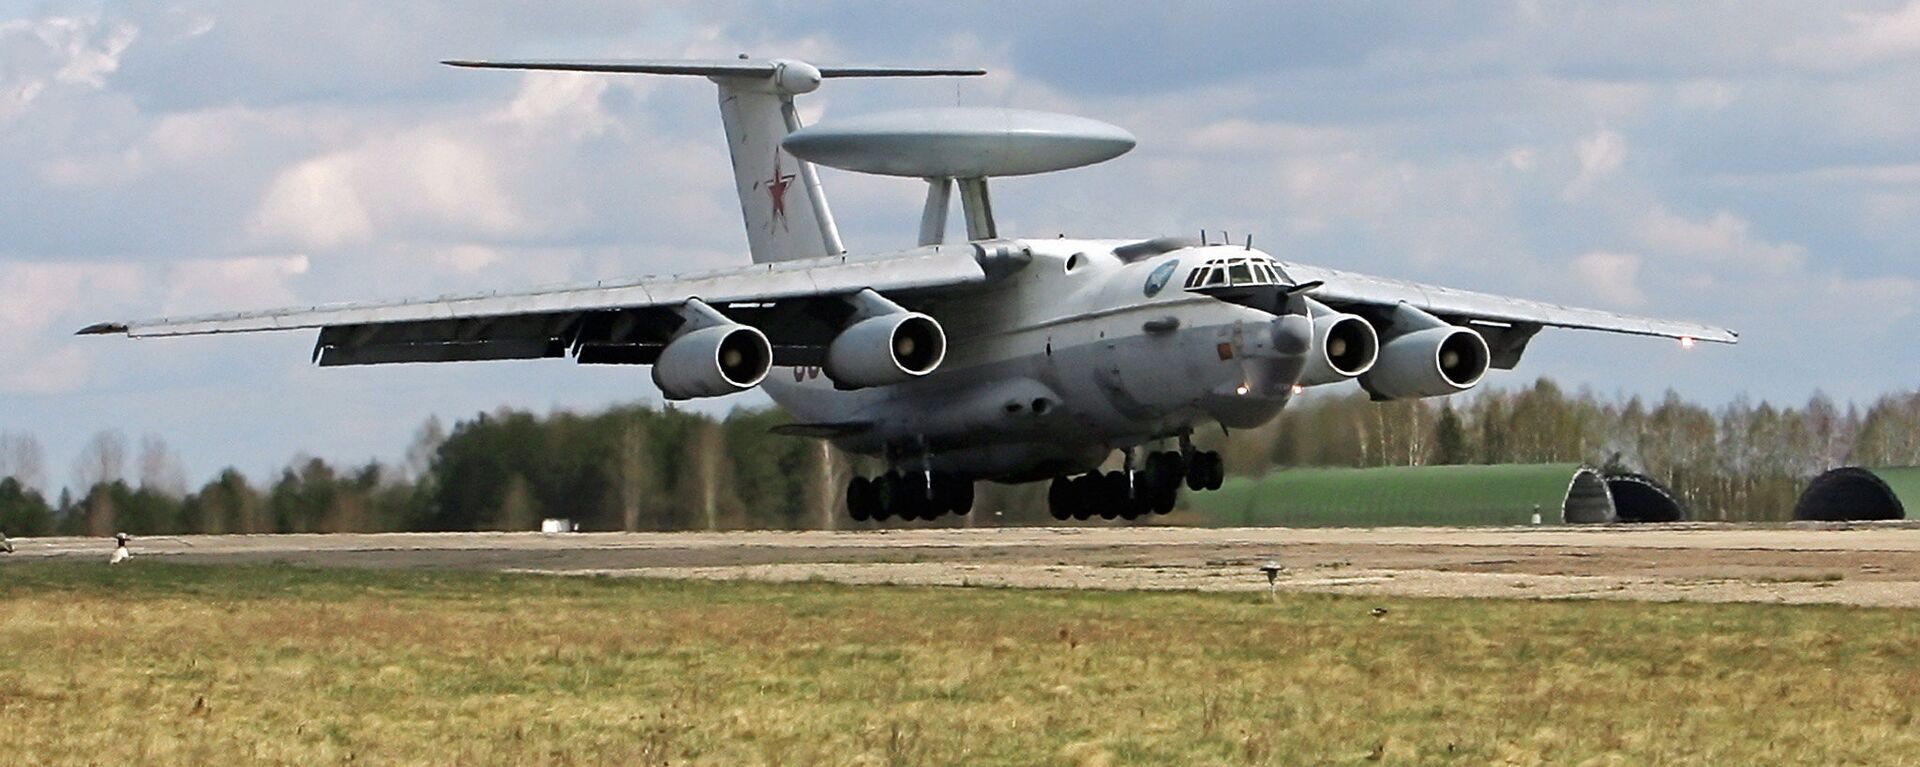 The Beriev A-50, predecessor of the A-50U, presently being introduced into the Russian Aerospace Defense Forces - Sputnik International, 1920, 27.06.2016